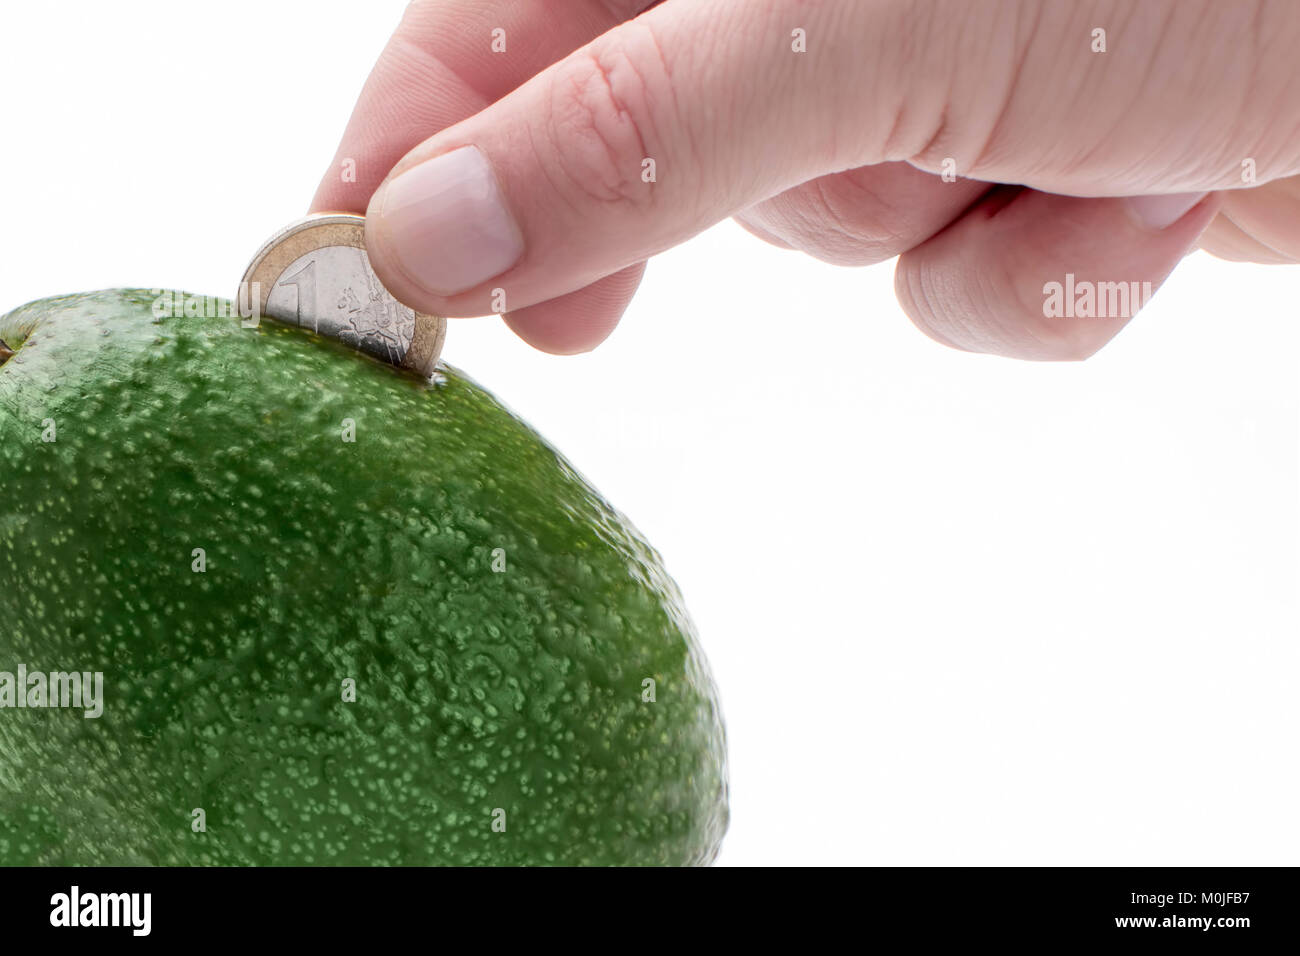 https://c8.alamy.com/comp/M0JFB7/avocados-as-a-piggy-bank-in-which-the-hand-puts-a-coin-M0JFB7.jpg